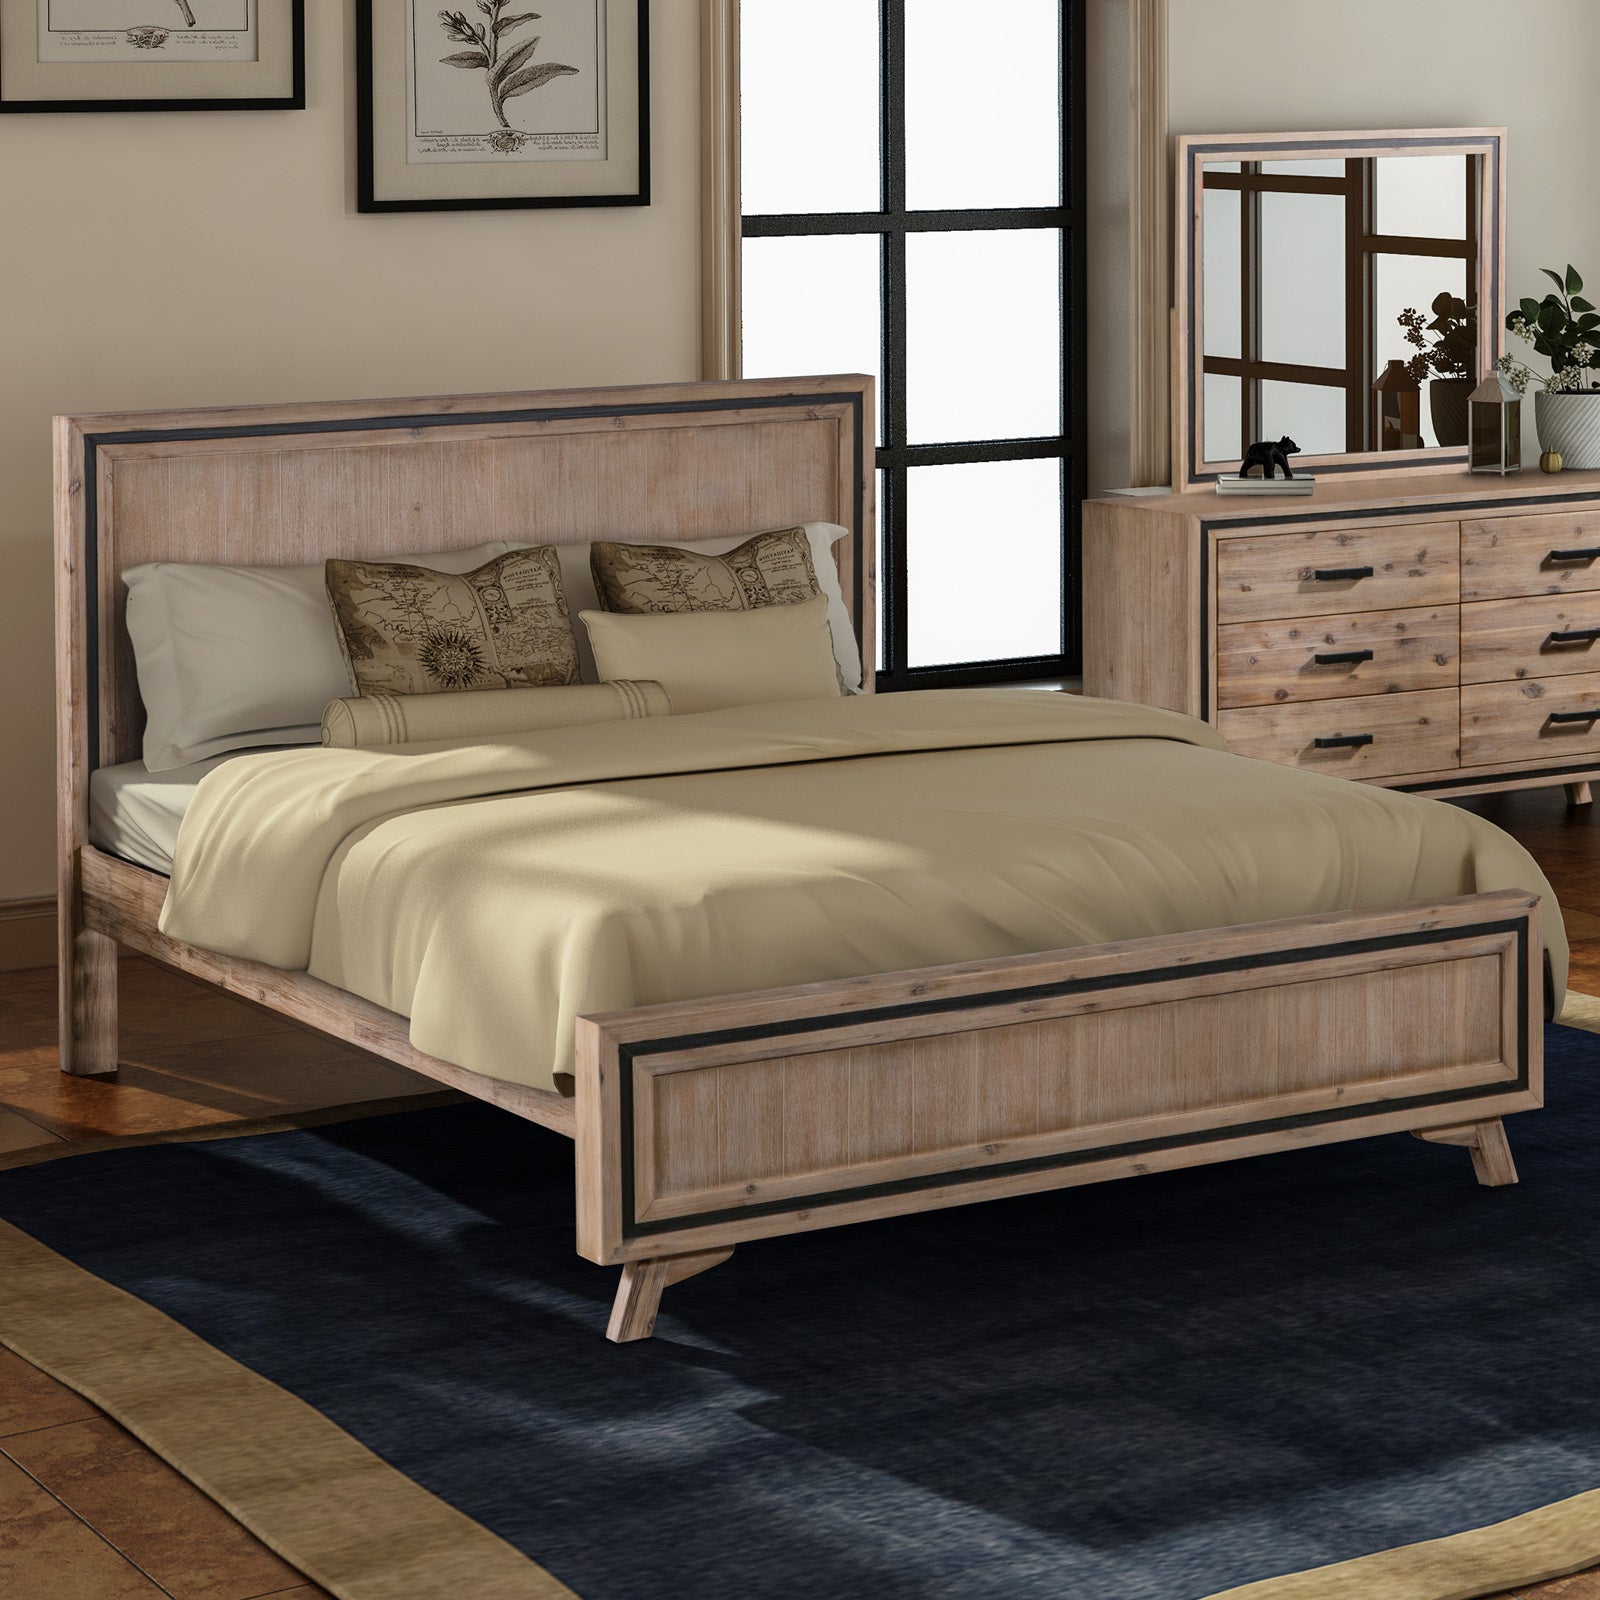 King Size Silver Brush Bed Frame in Acacia Wood Construction